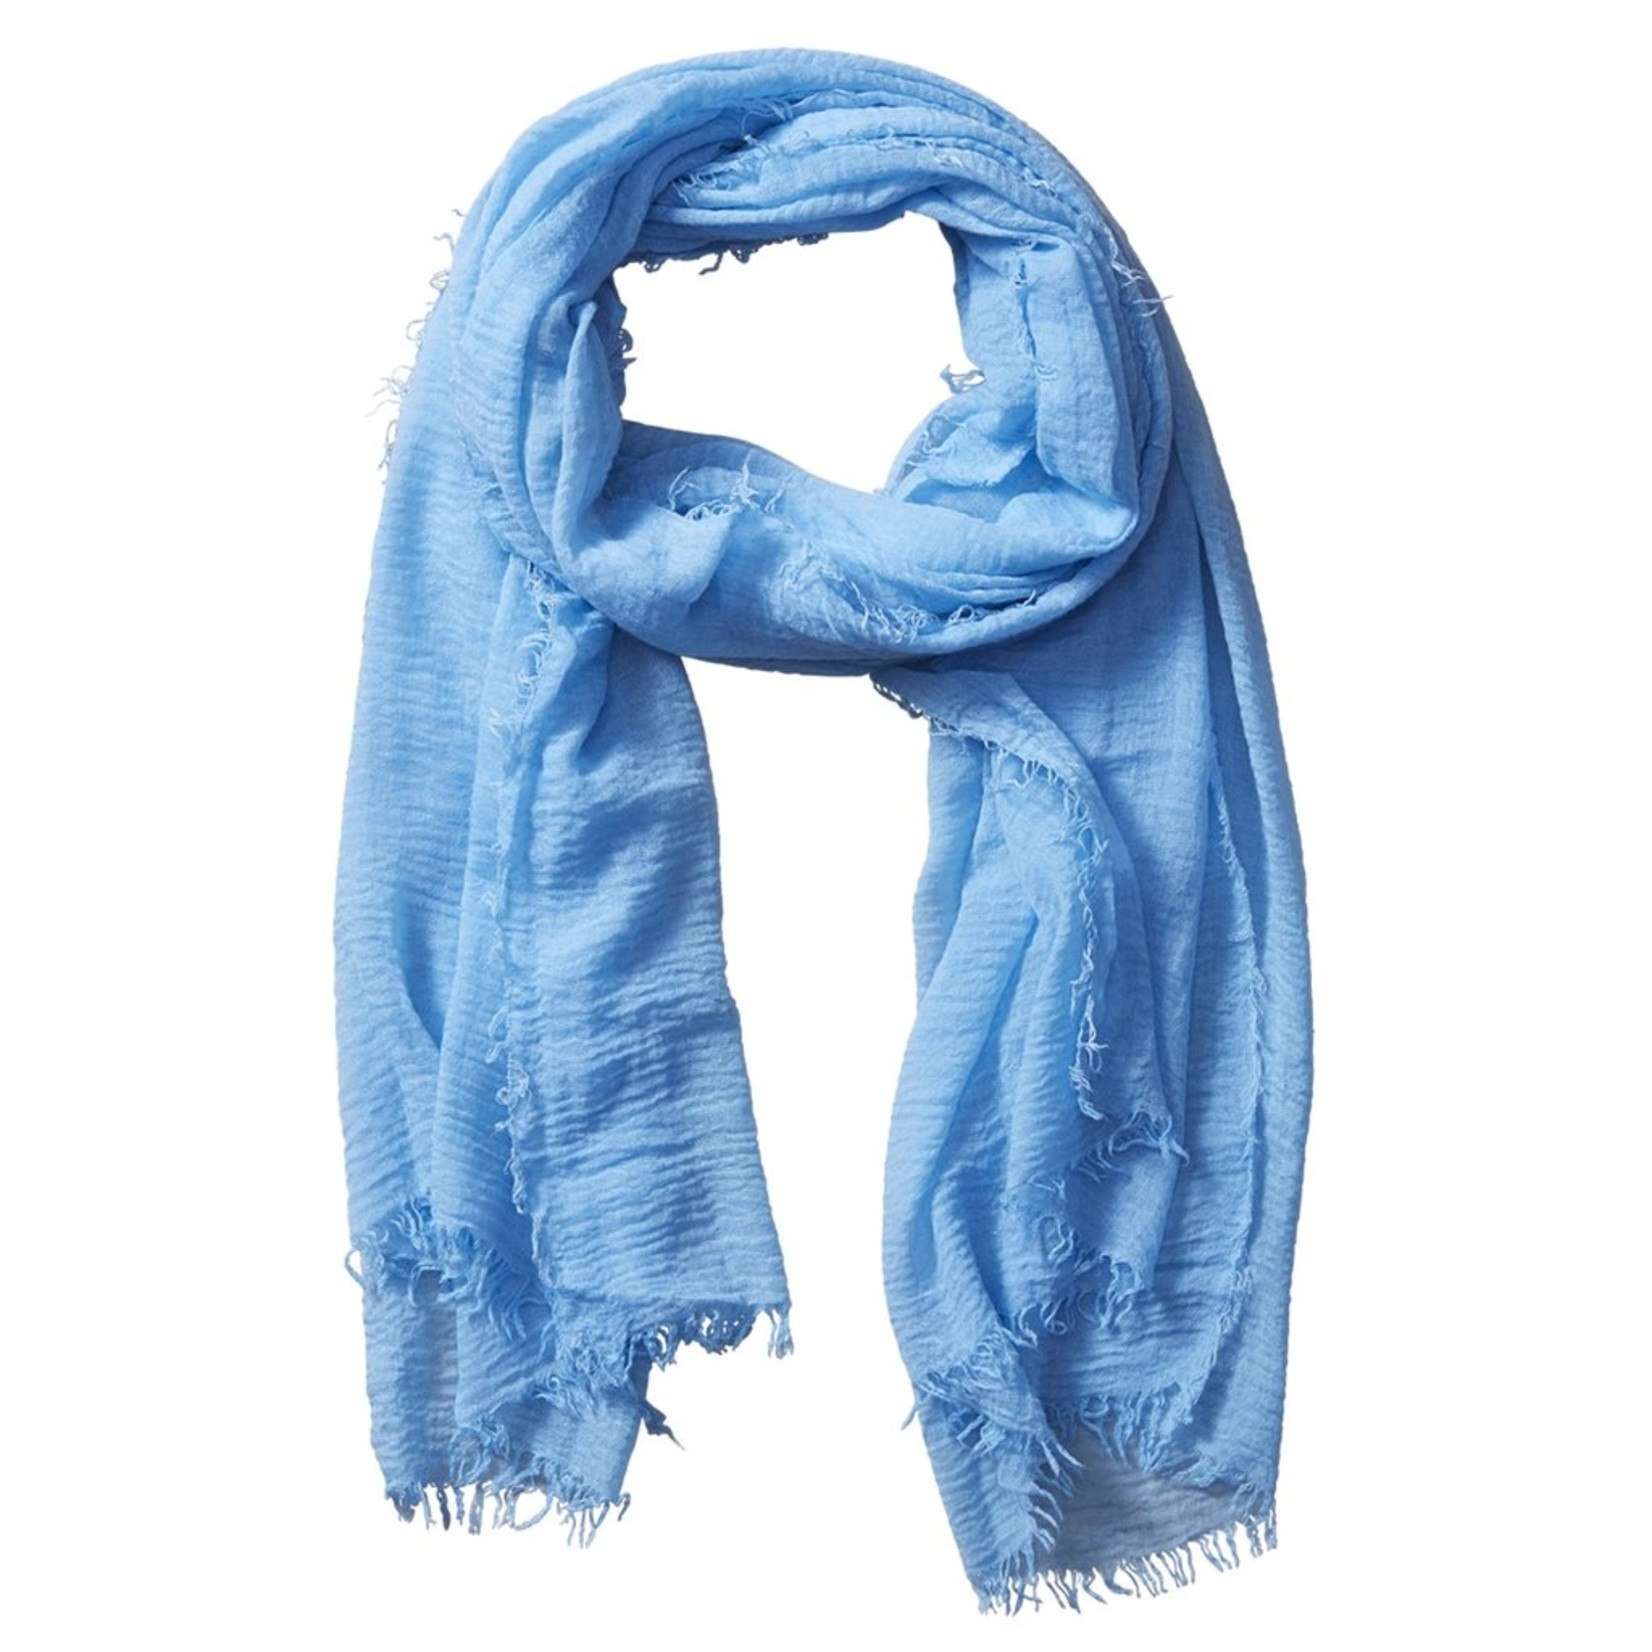 Hadley Wren - Insect Shield Scarf - Solid Light Blue